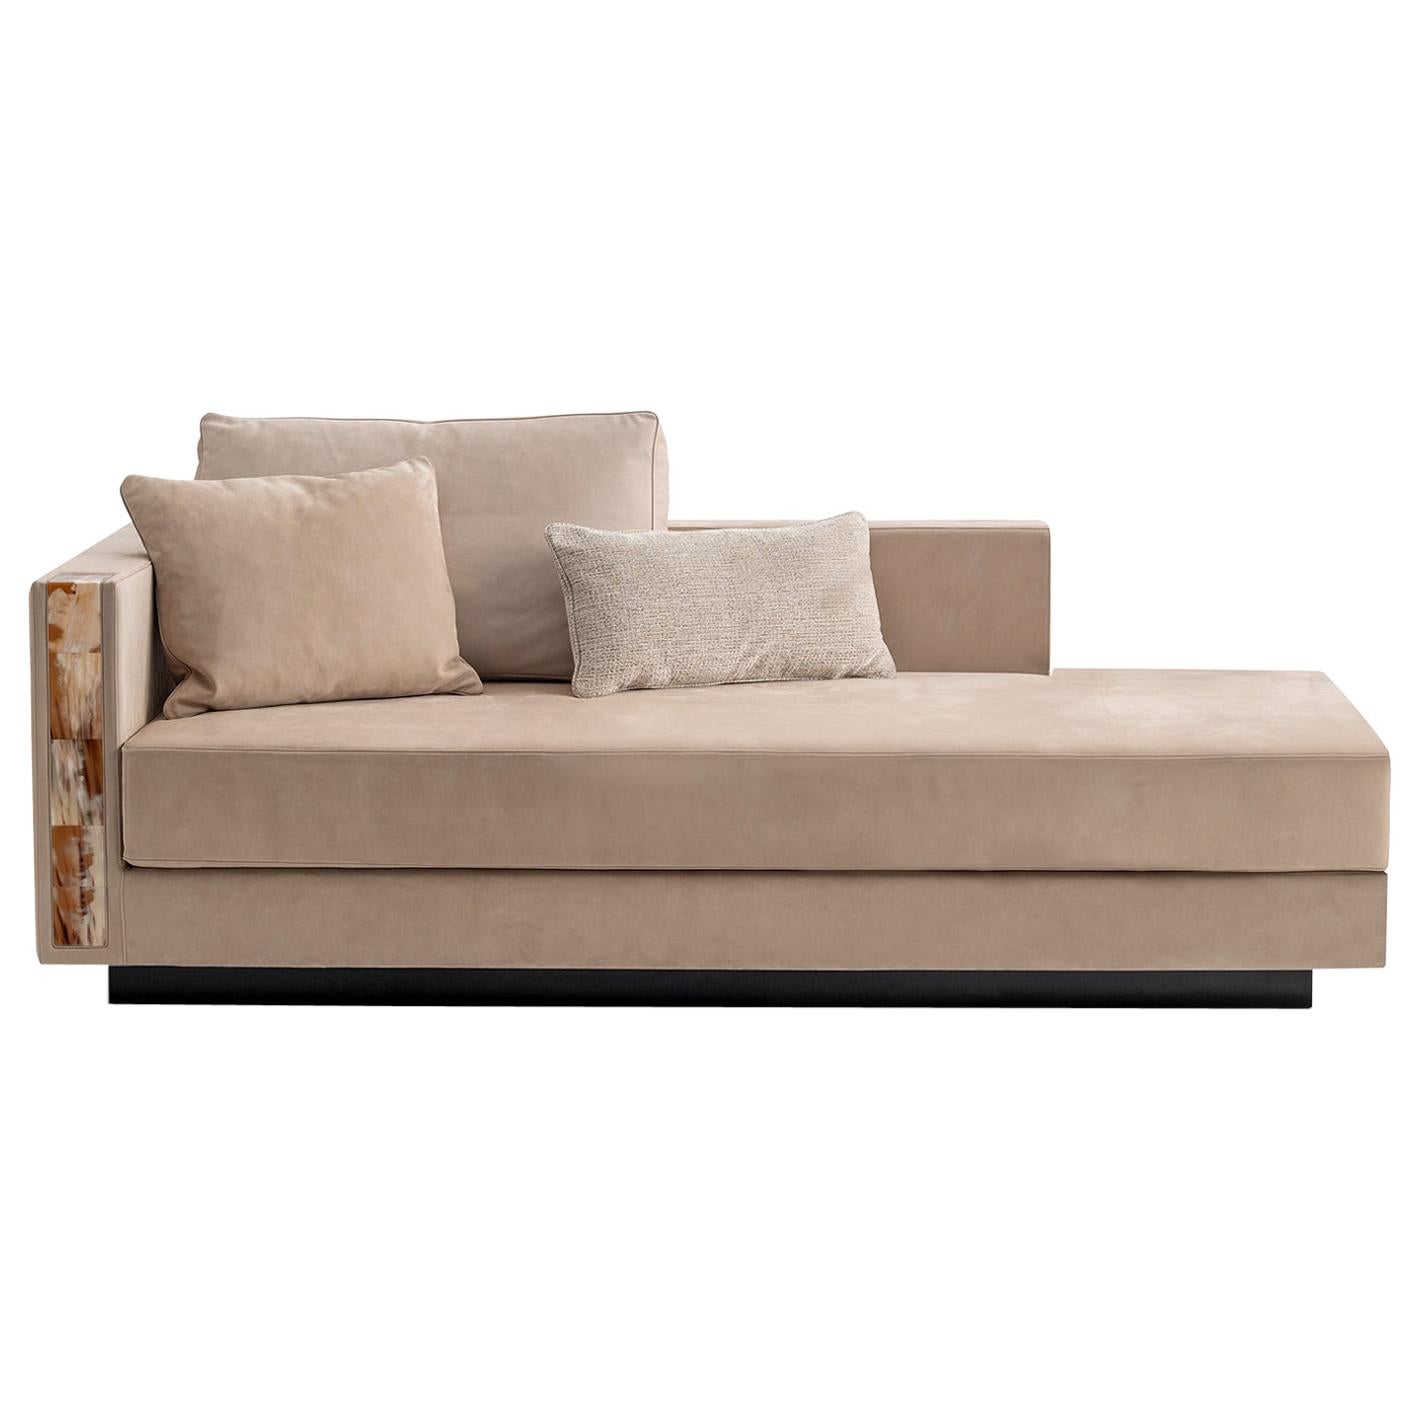 Zeus Chaise Longue in Nabuk Leather with Armrests in Corno Italiano, Mod 6088SXL